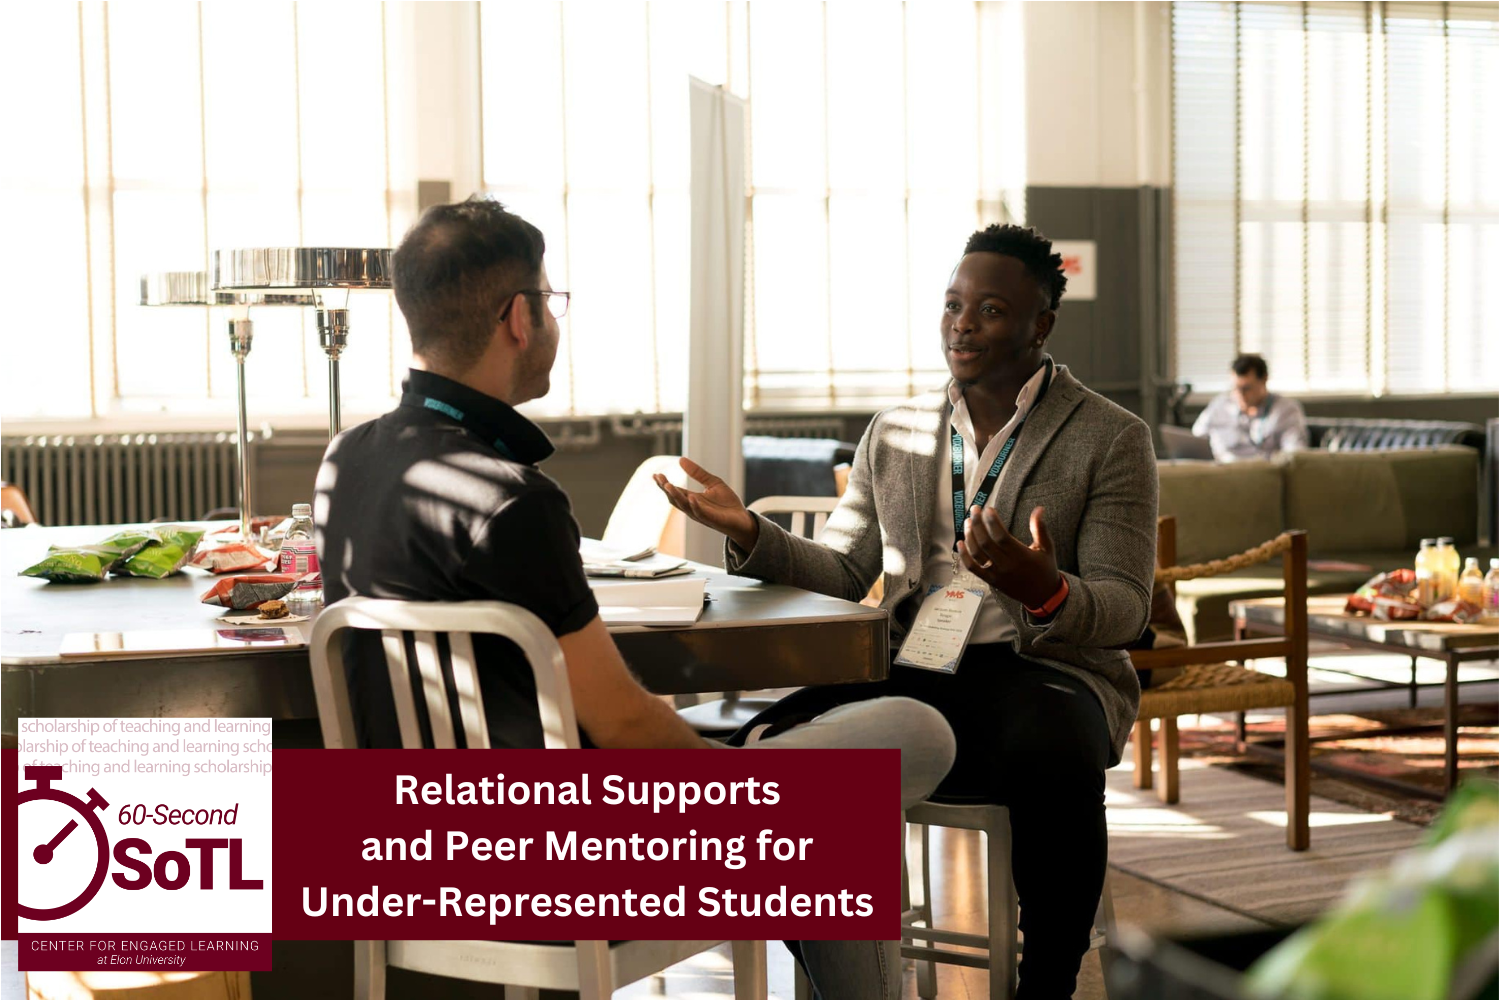 Two people sit at the corner of a table, talking. Another person sits at a couch in the background. An overlay reads, "60-Second SoTL. Relational supports and peer mentoring for under-represented students."